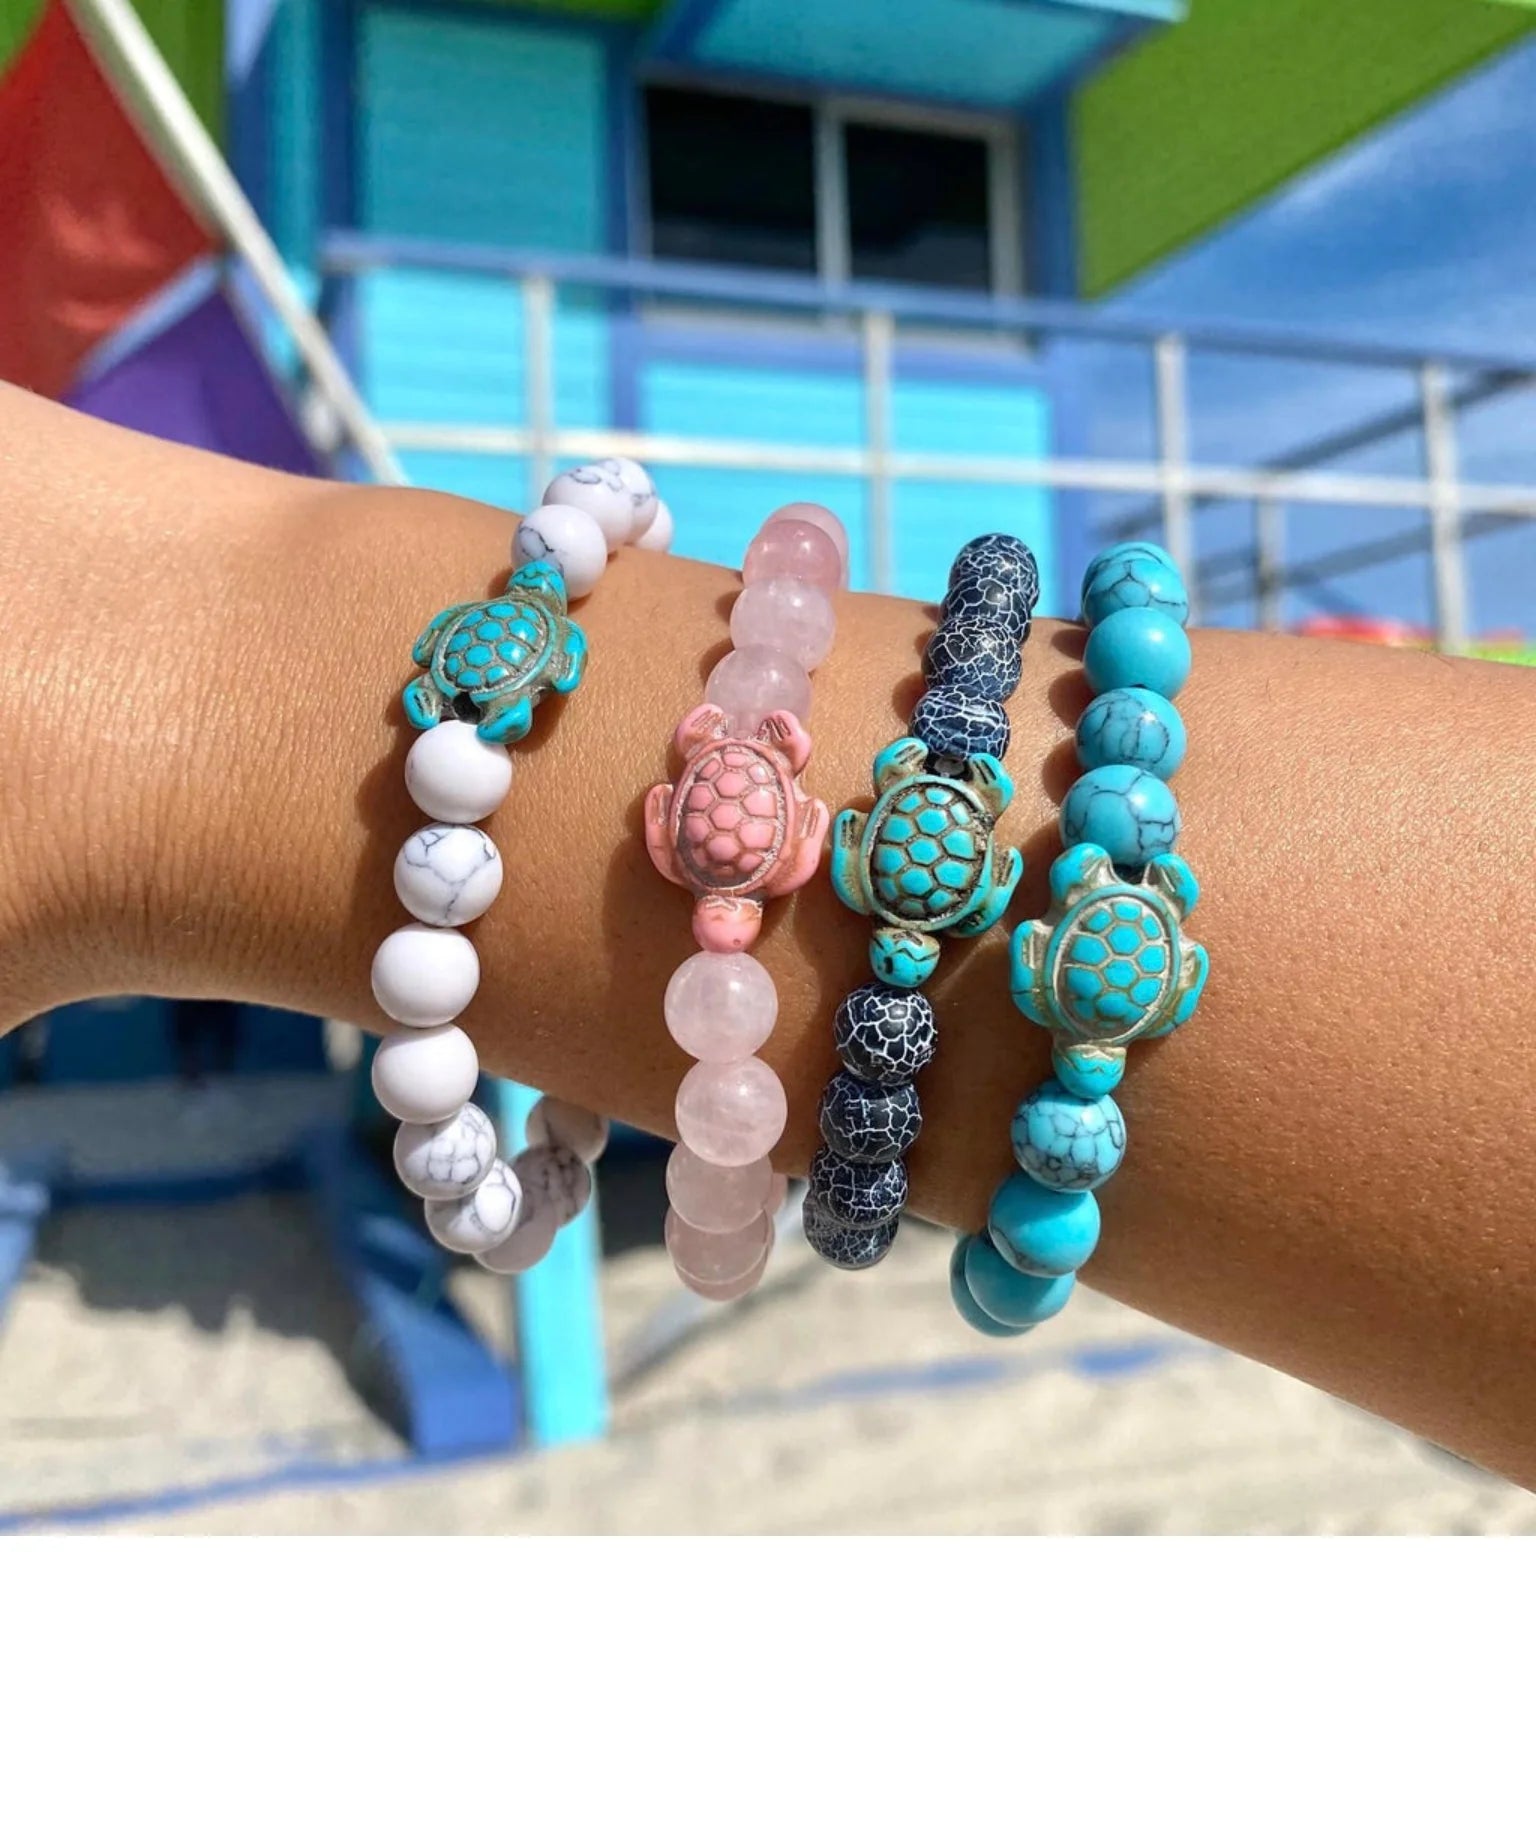 Sea Turtle Jewelry  Save The Turtles with Fahlo